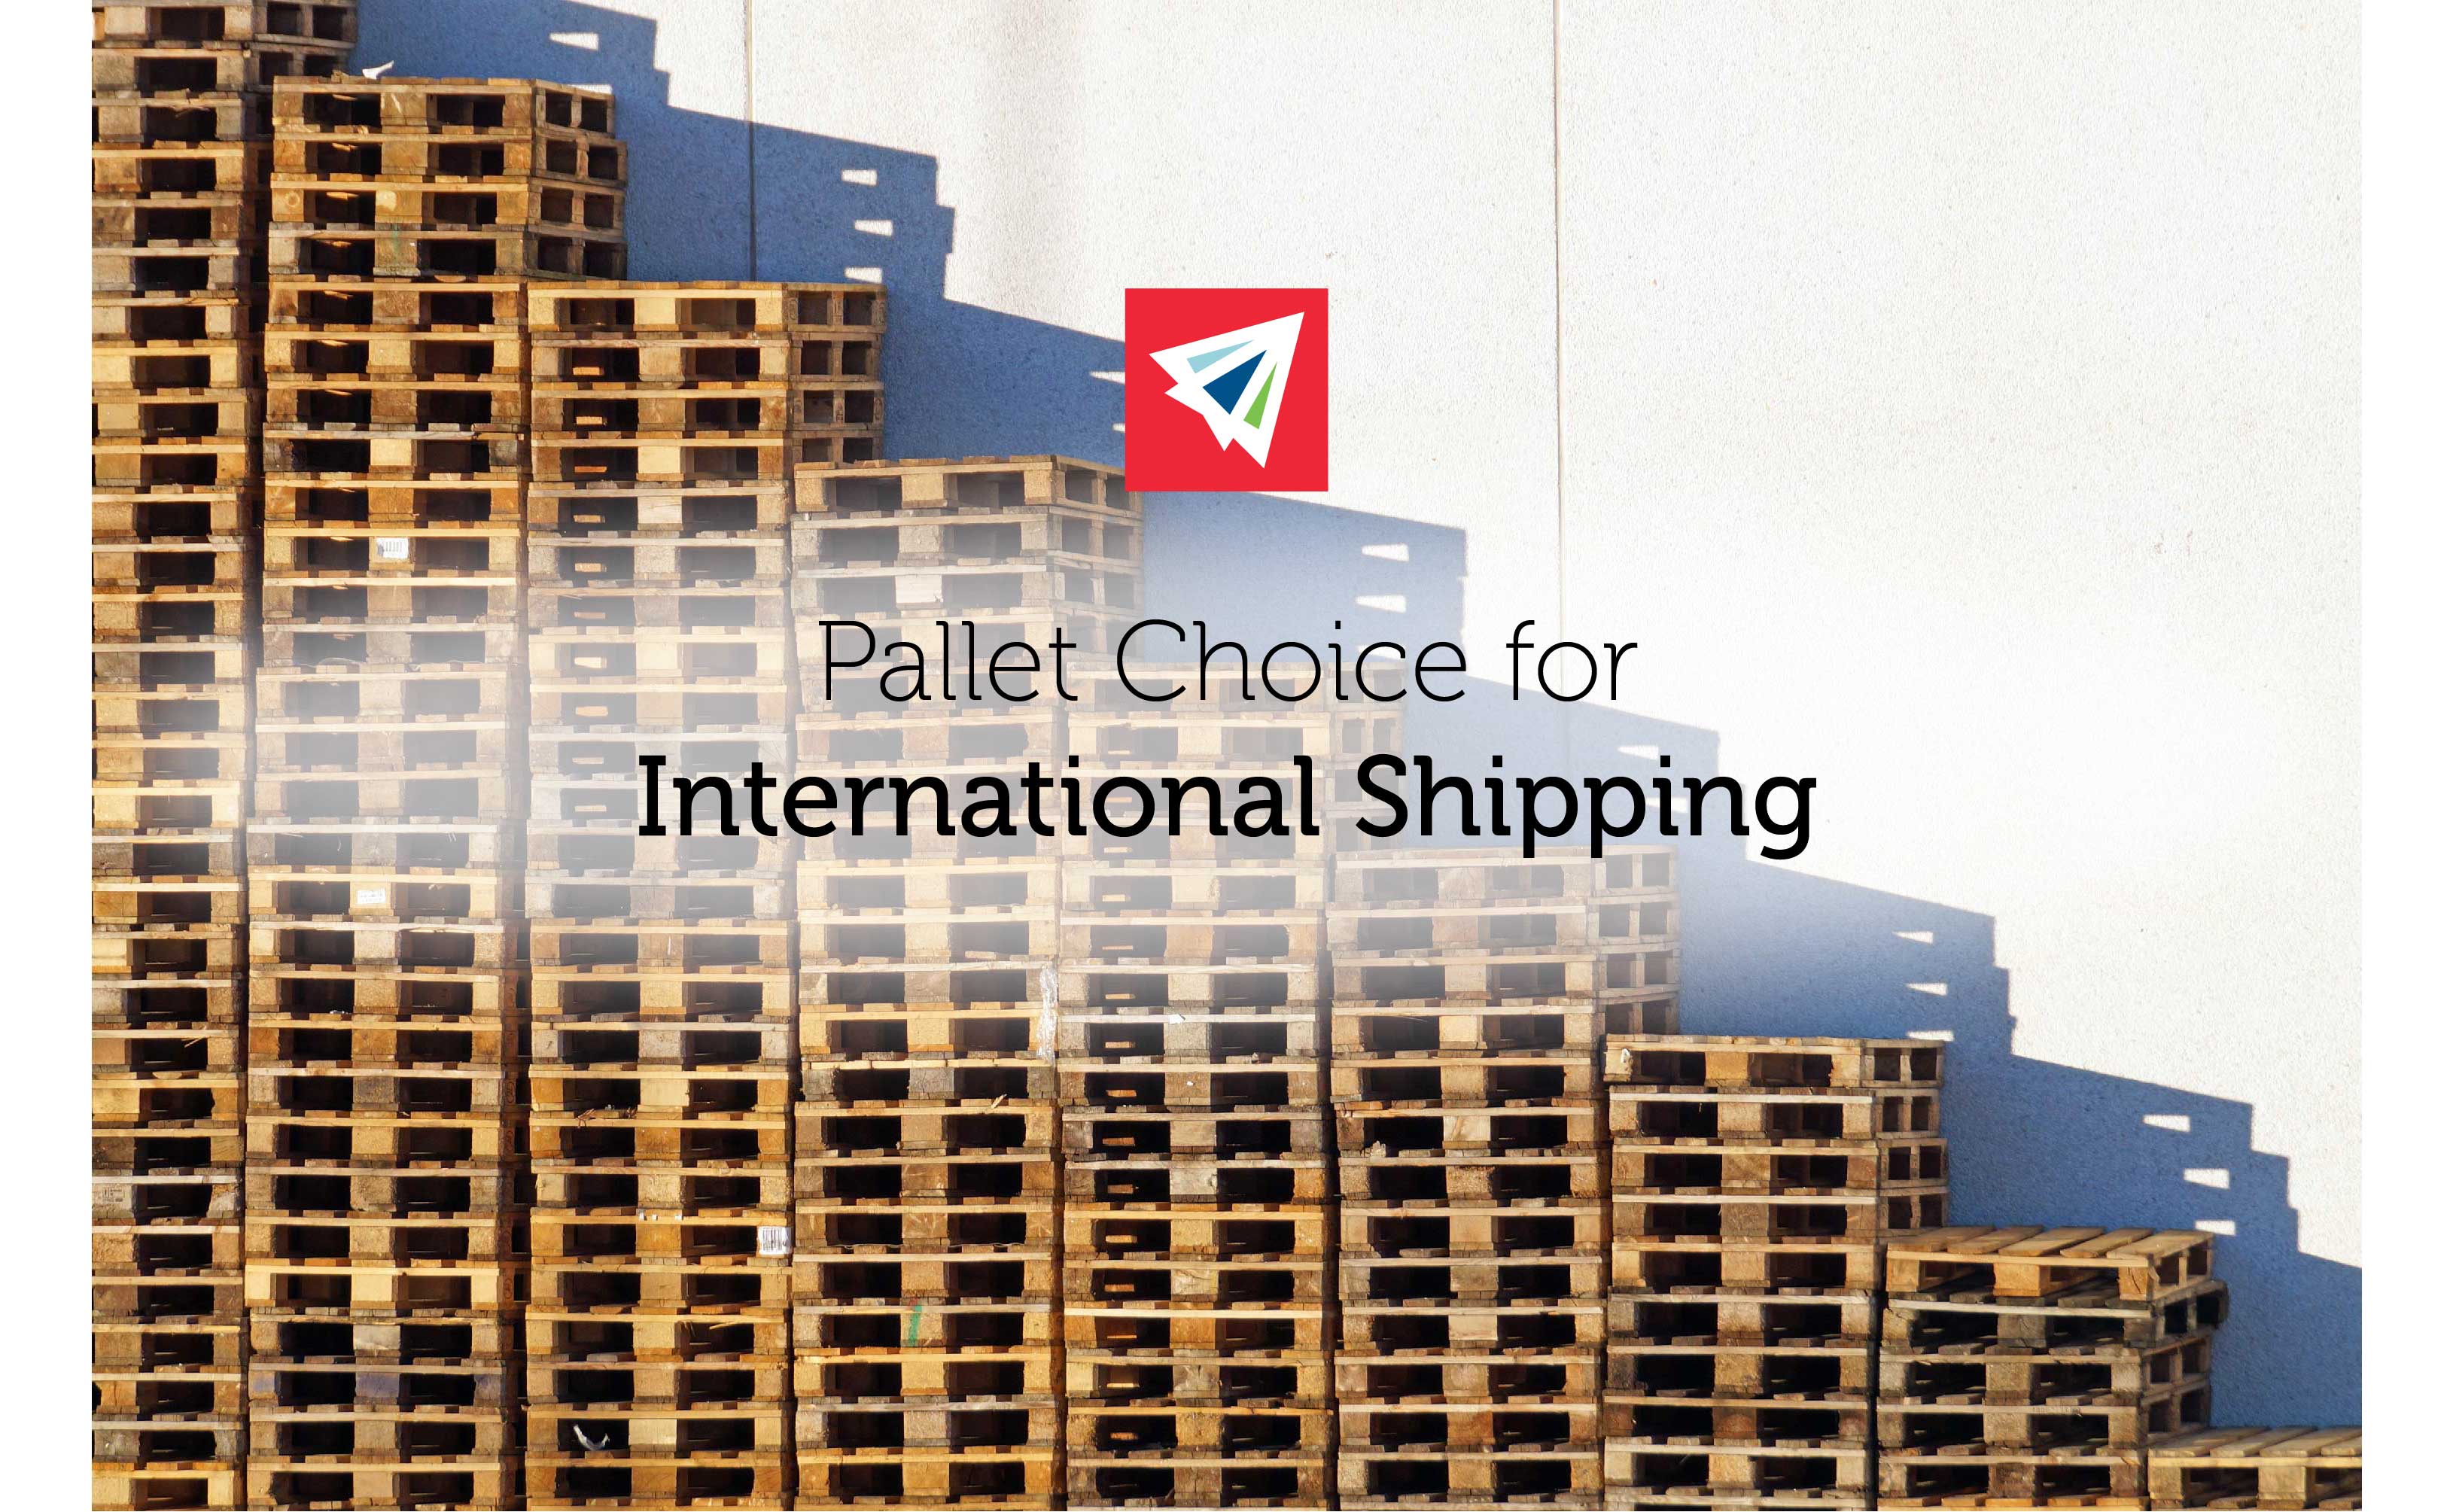 Pallet Choice for International Shipping